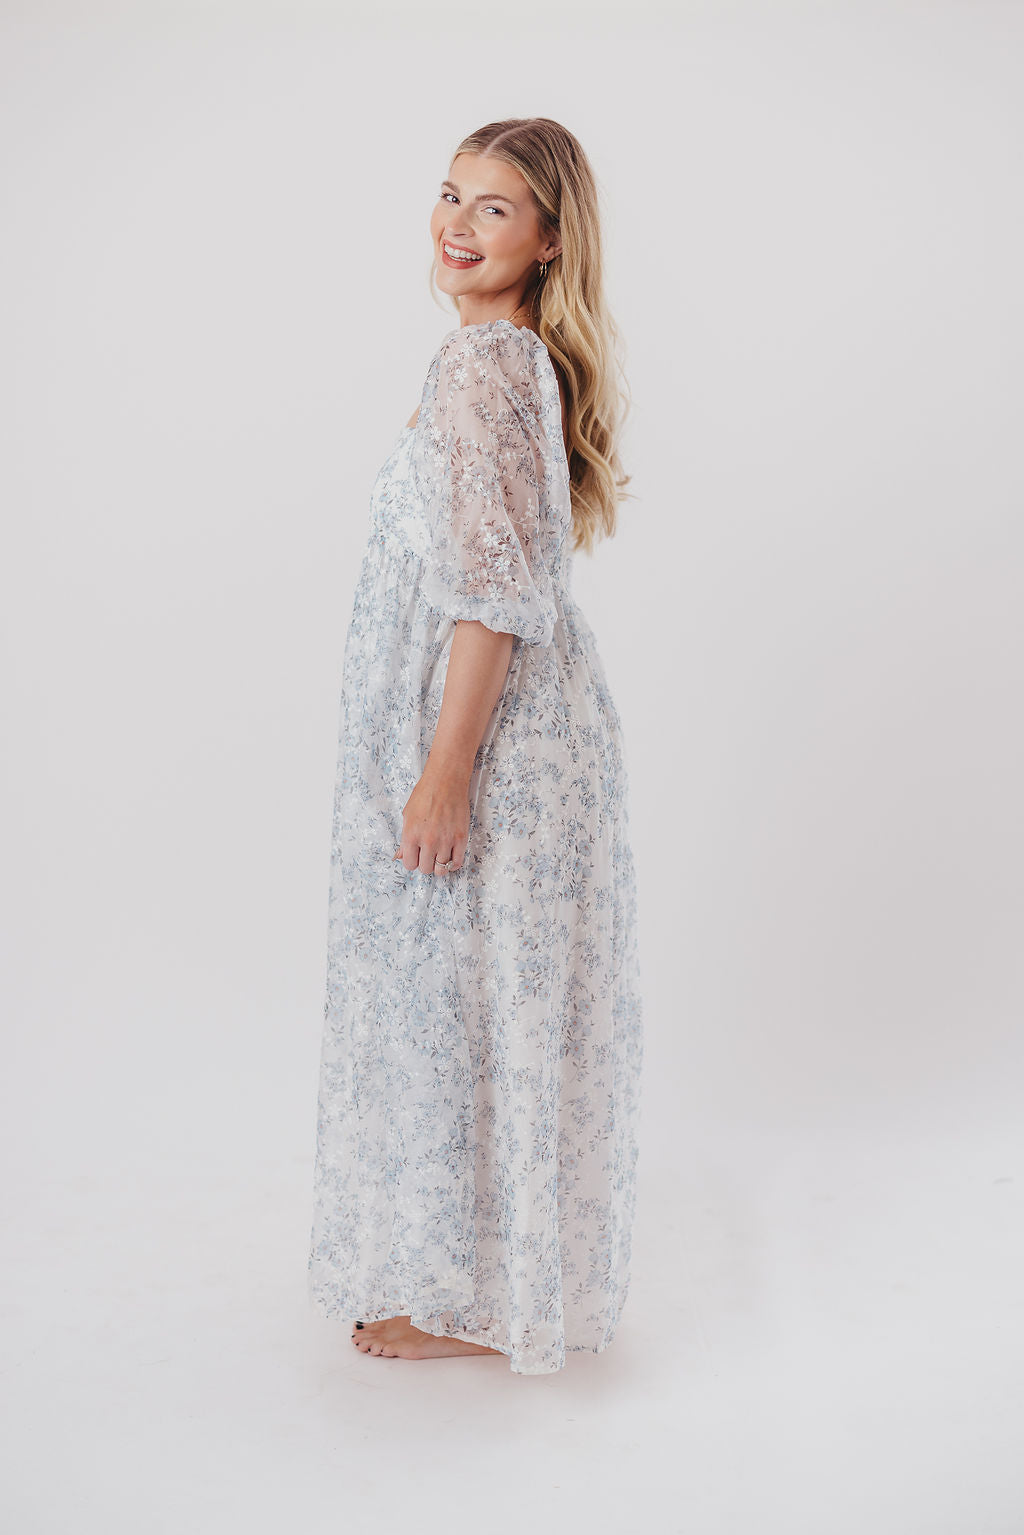 Mona Maxi Dress with Smocking in Blue White - Bump Friendly & Inclusive Sizing (S-3XL)